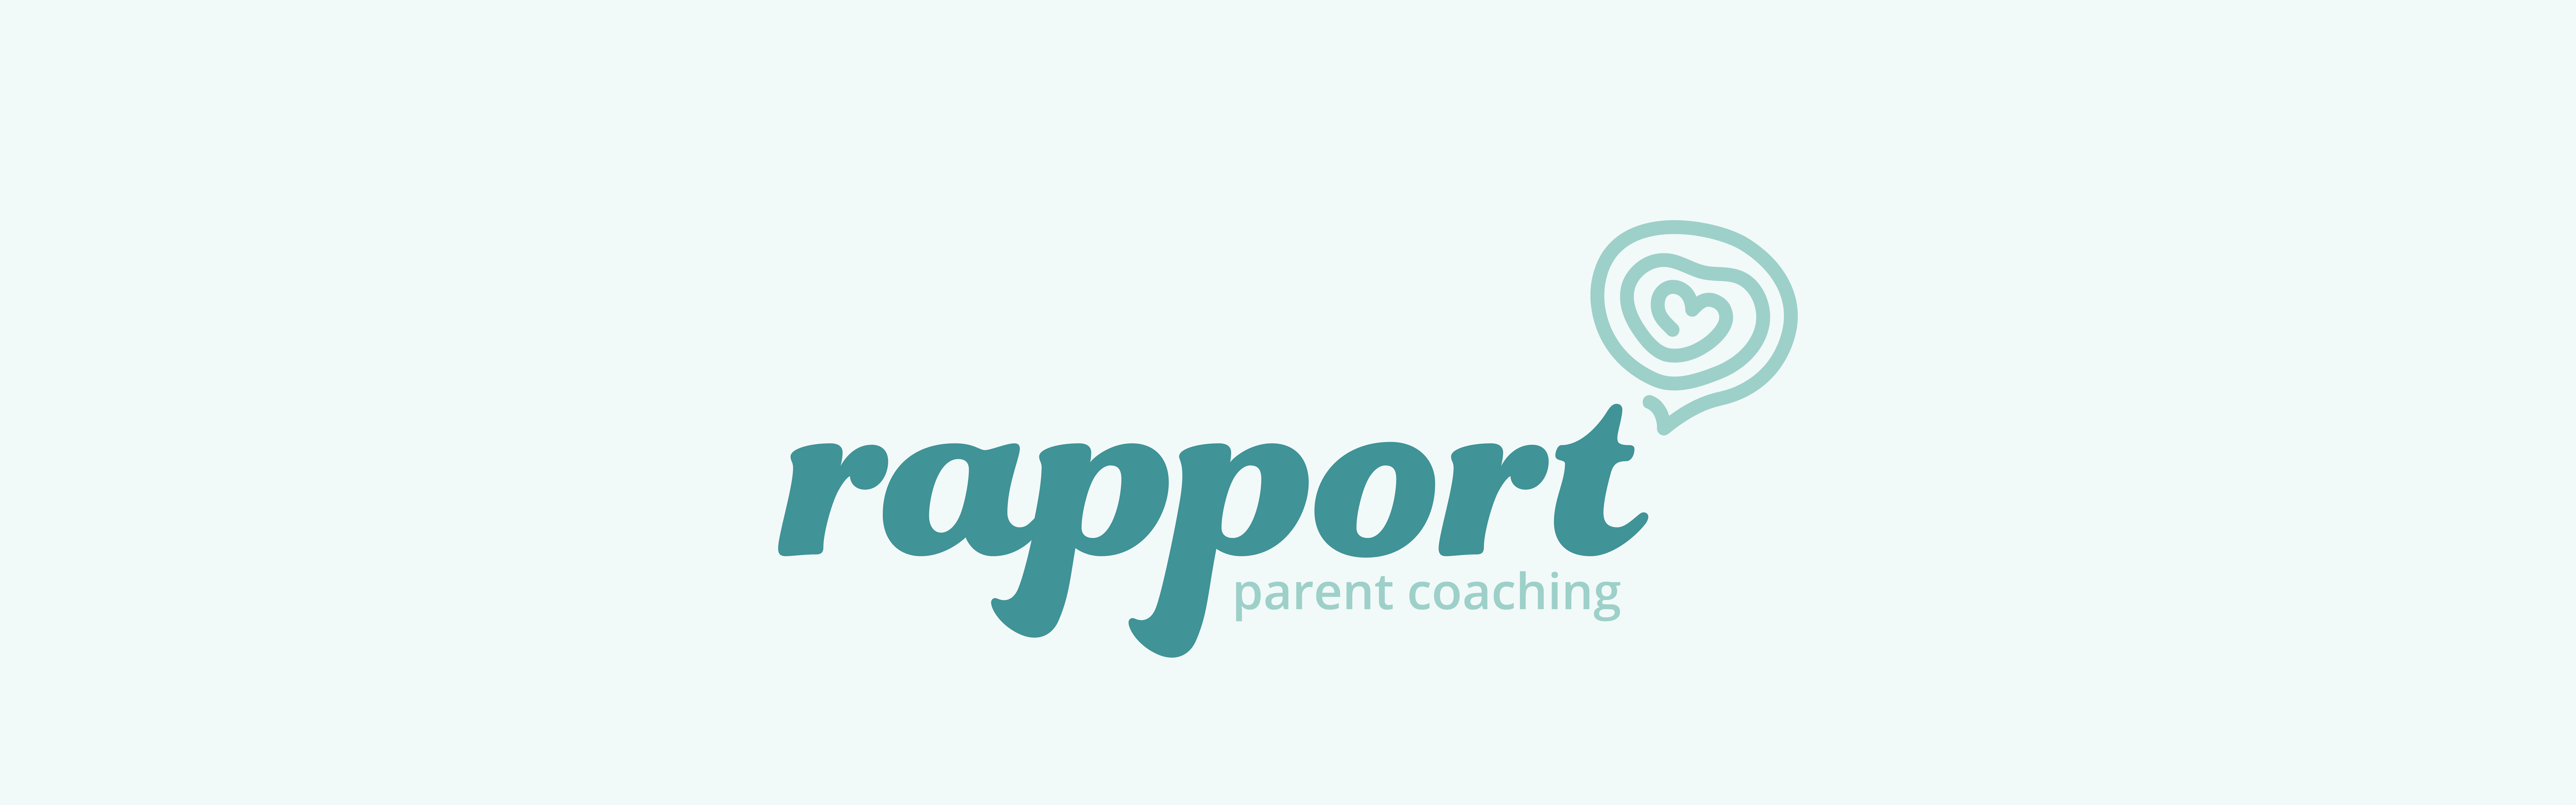 The image displays a logo with the word "Rapport" in lowercase turquoise letters, followed by the phrase "Parent Coaching" in a smaller font size. Above the word "Rapport,